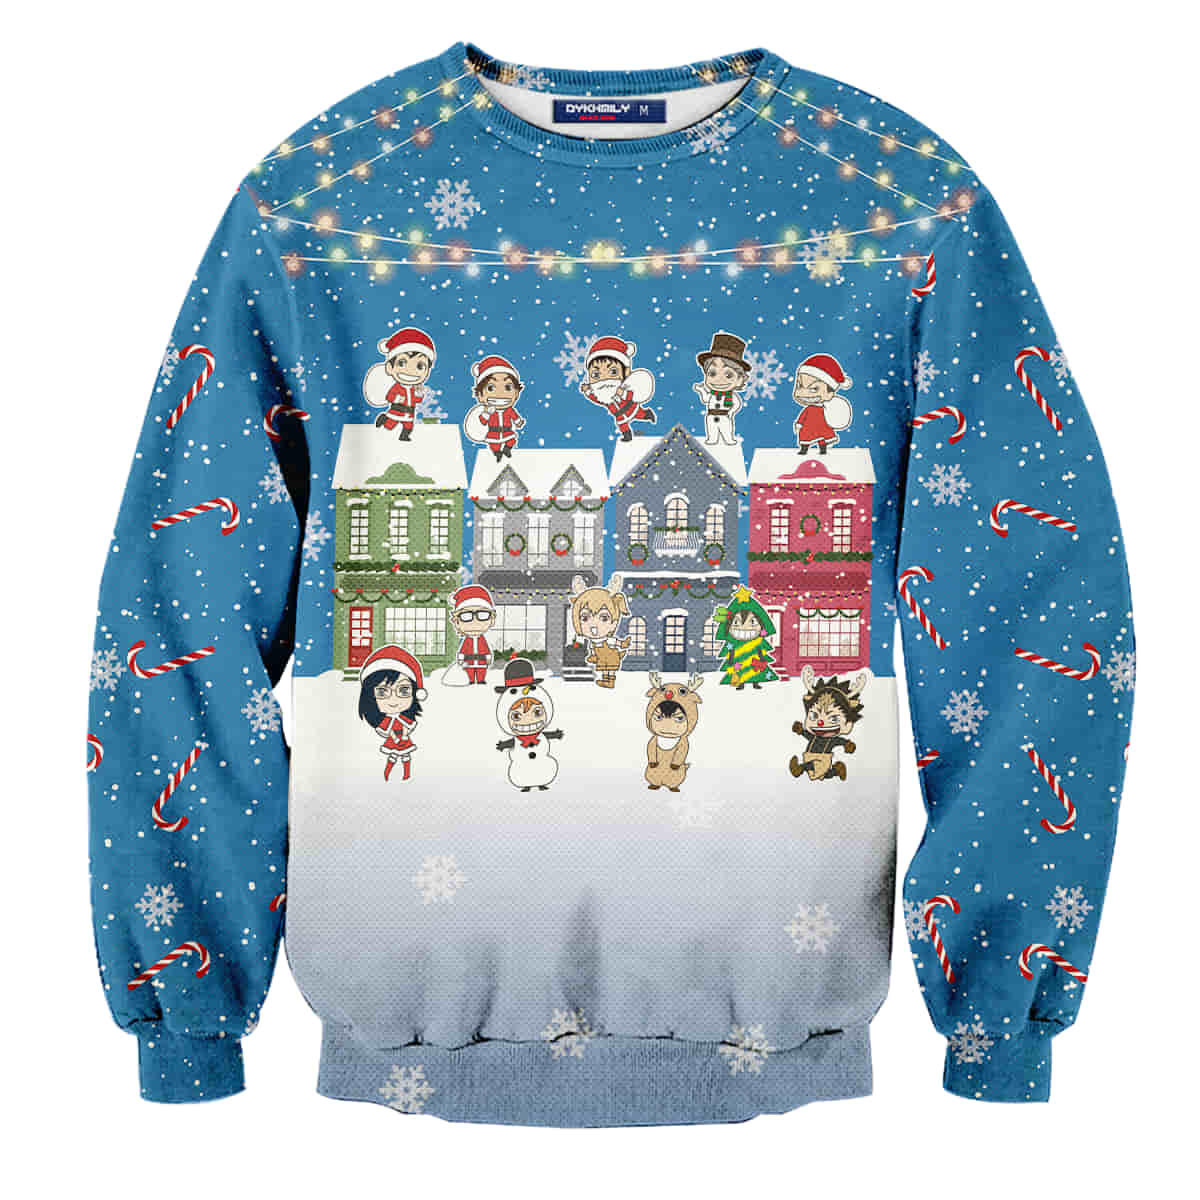 Fly High Christmas Wool Knitted 3D Sweater